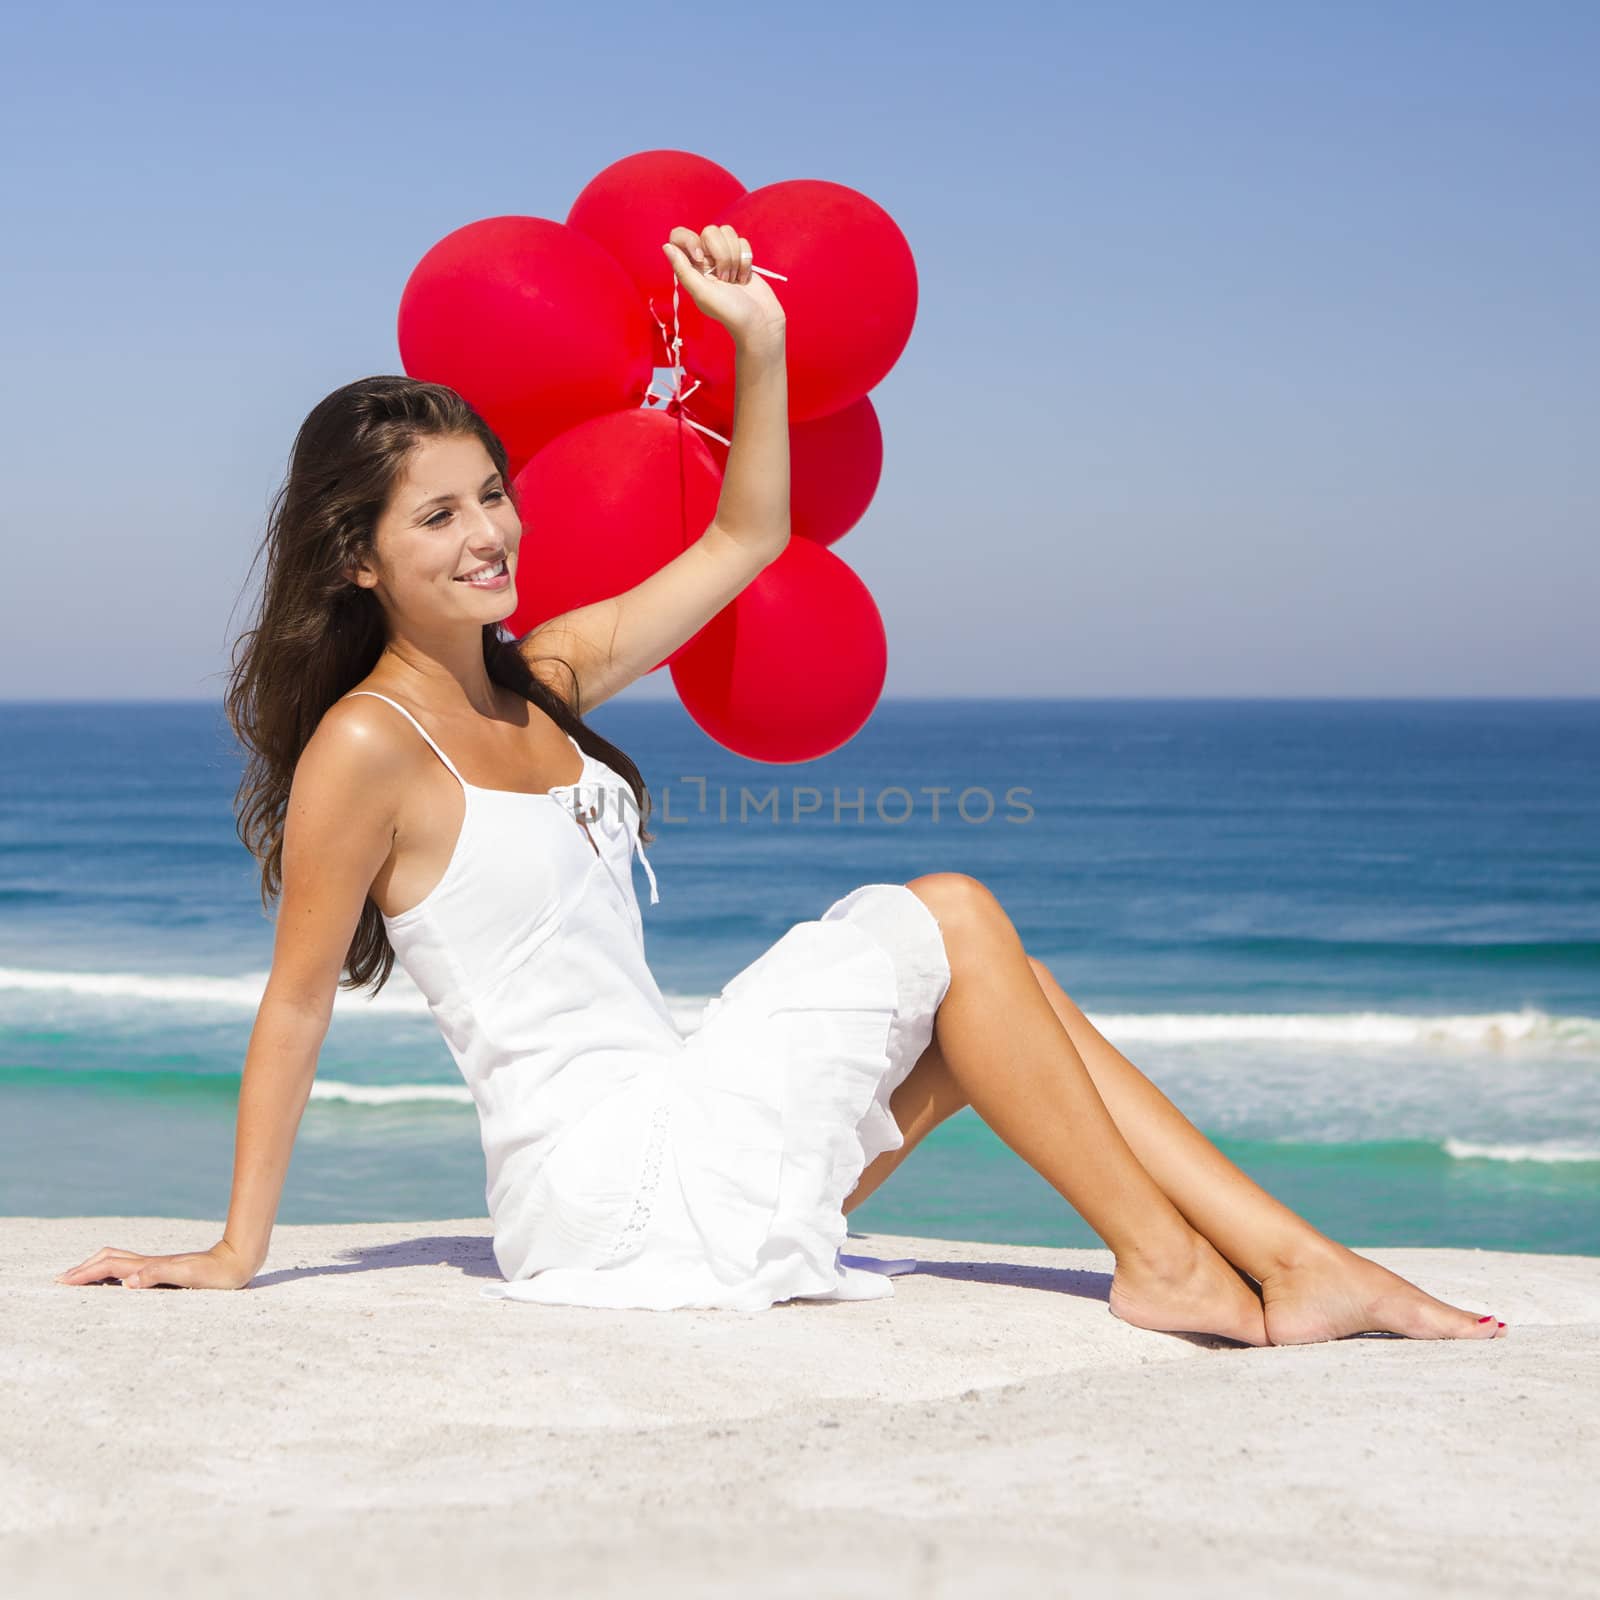 Beautiful girl with red ballons sitting in the beach 